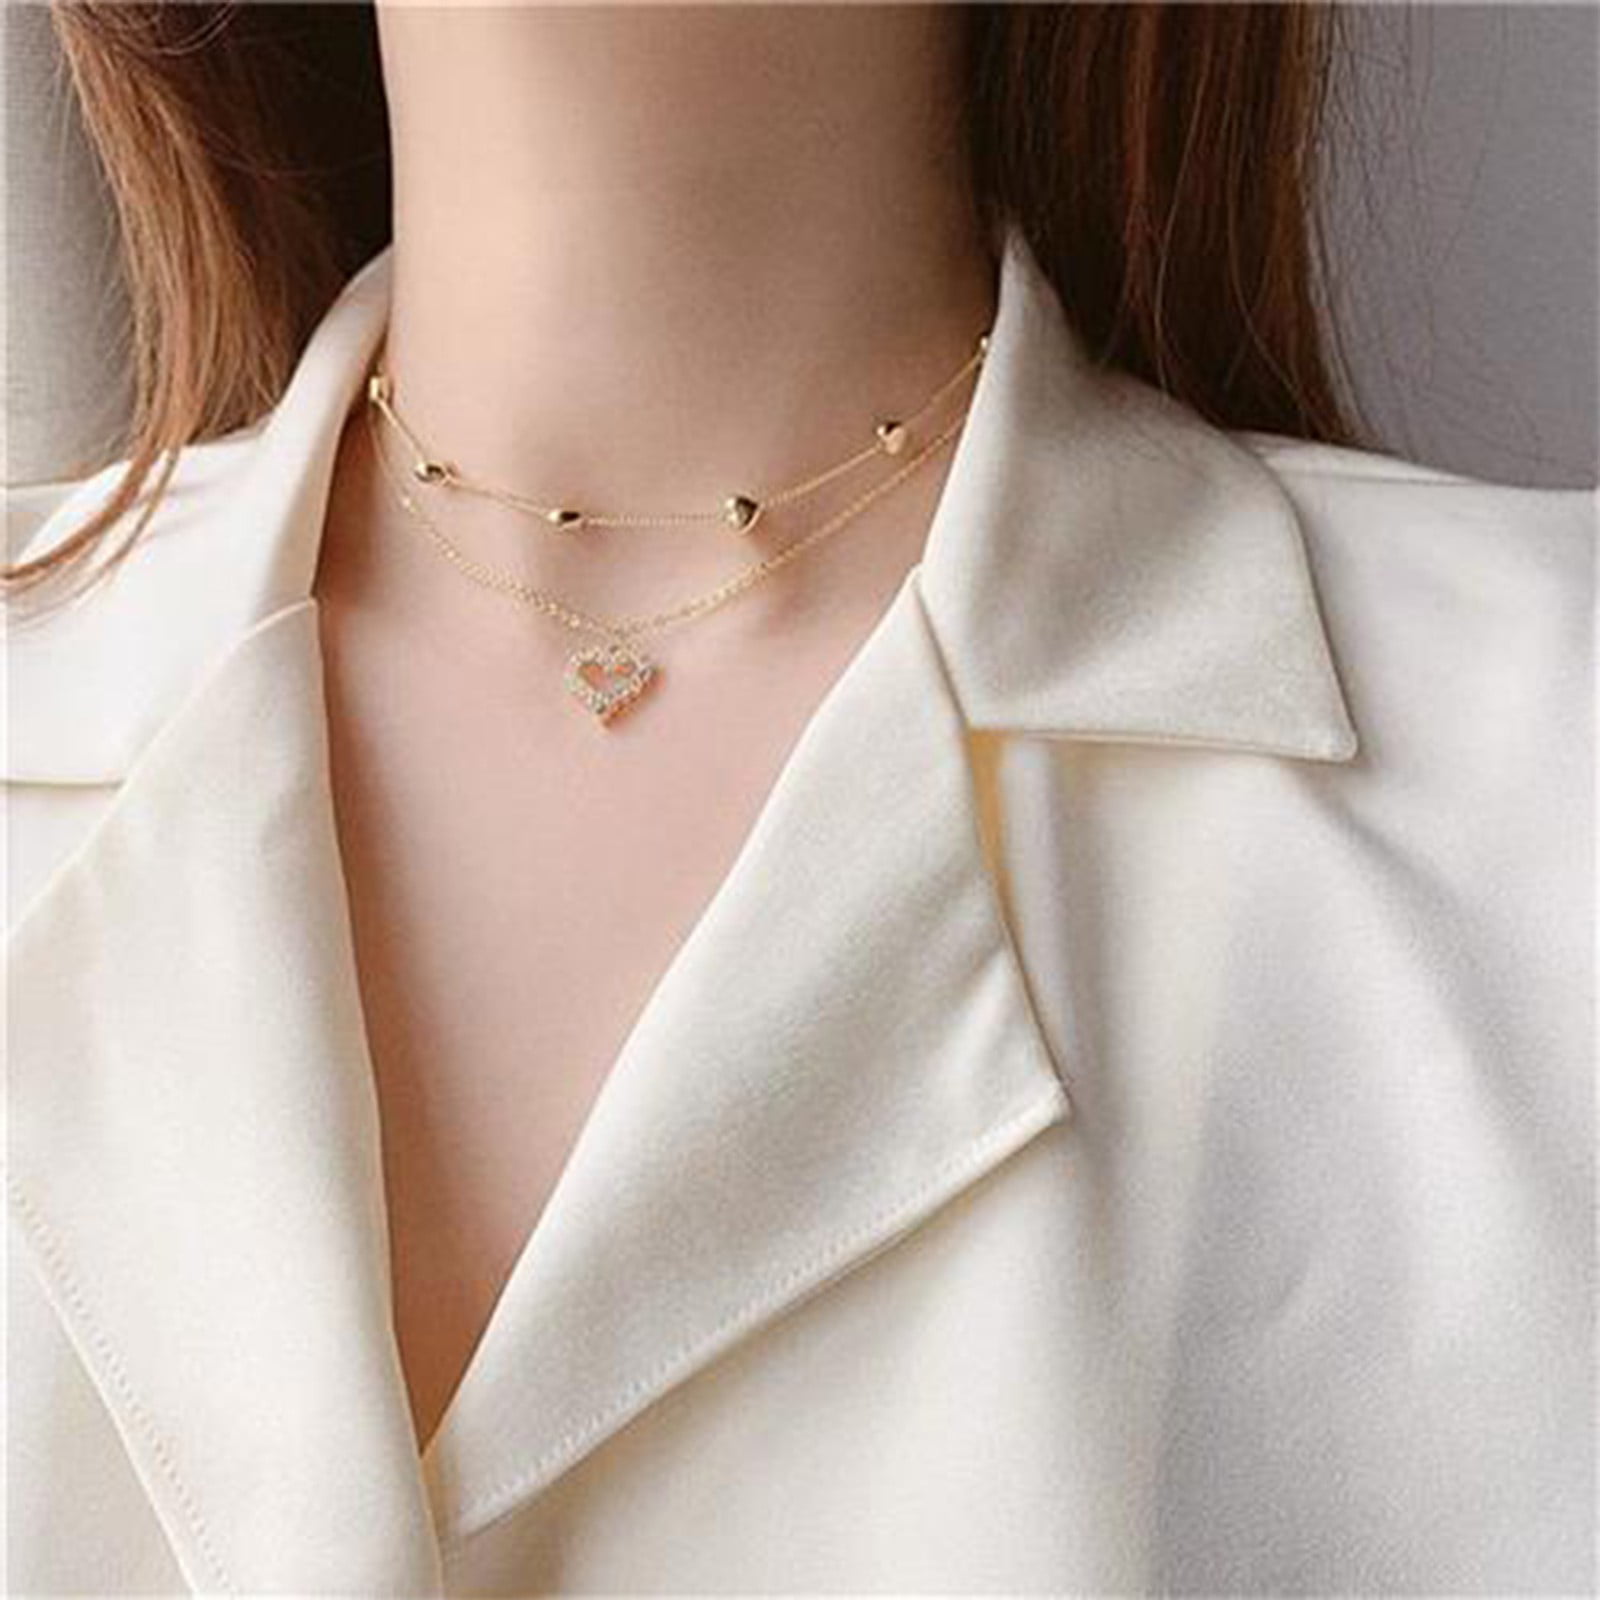 Designer Layered Heart Necklace Set For Women Set With 18k Gold And Silver  Plated Chain, Dainty Gold Choker, Arrow Bar, And Long Pendant For Women  From Premiumjewelrystore, $41.61